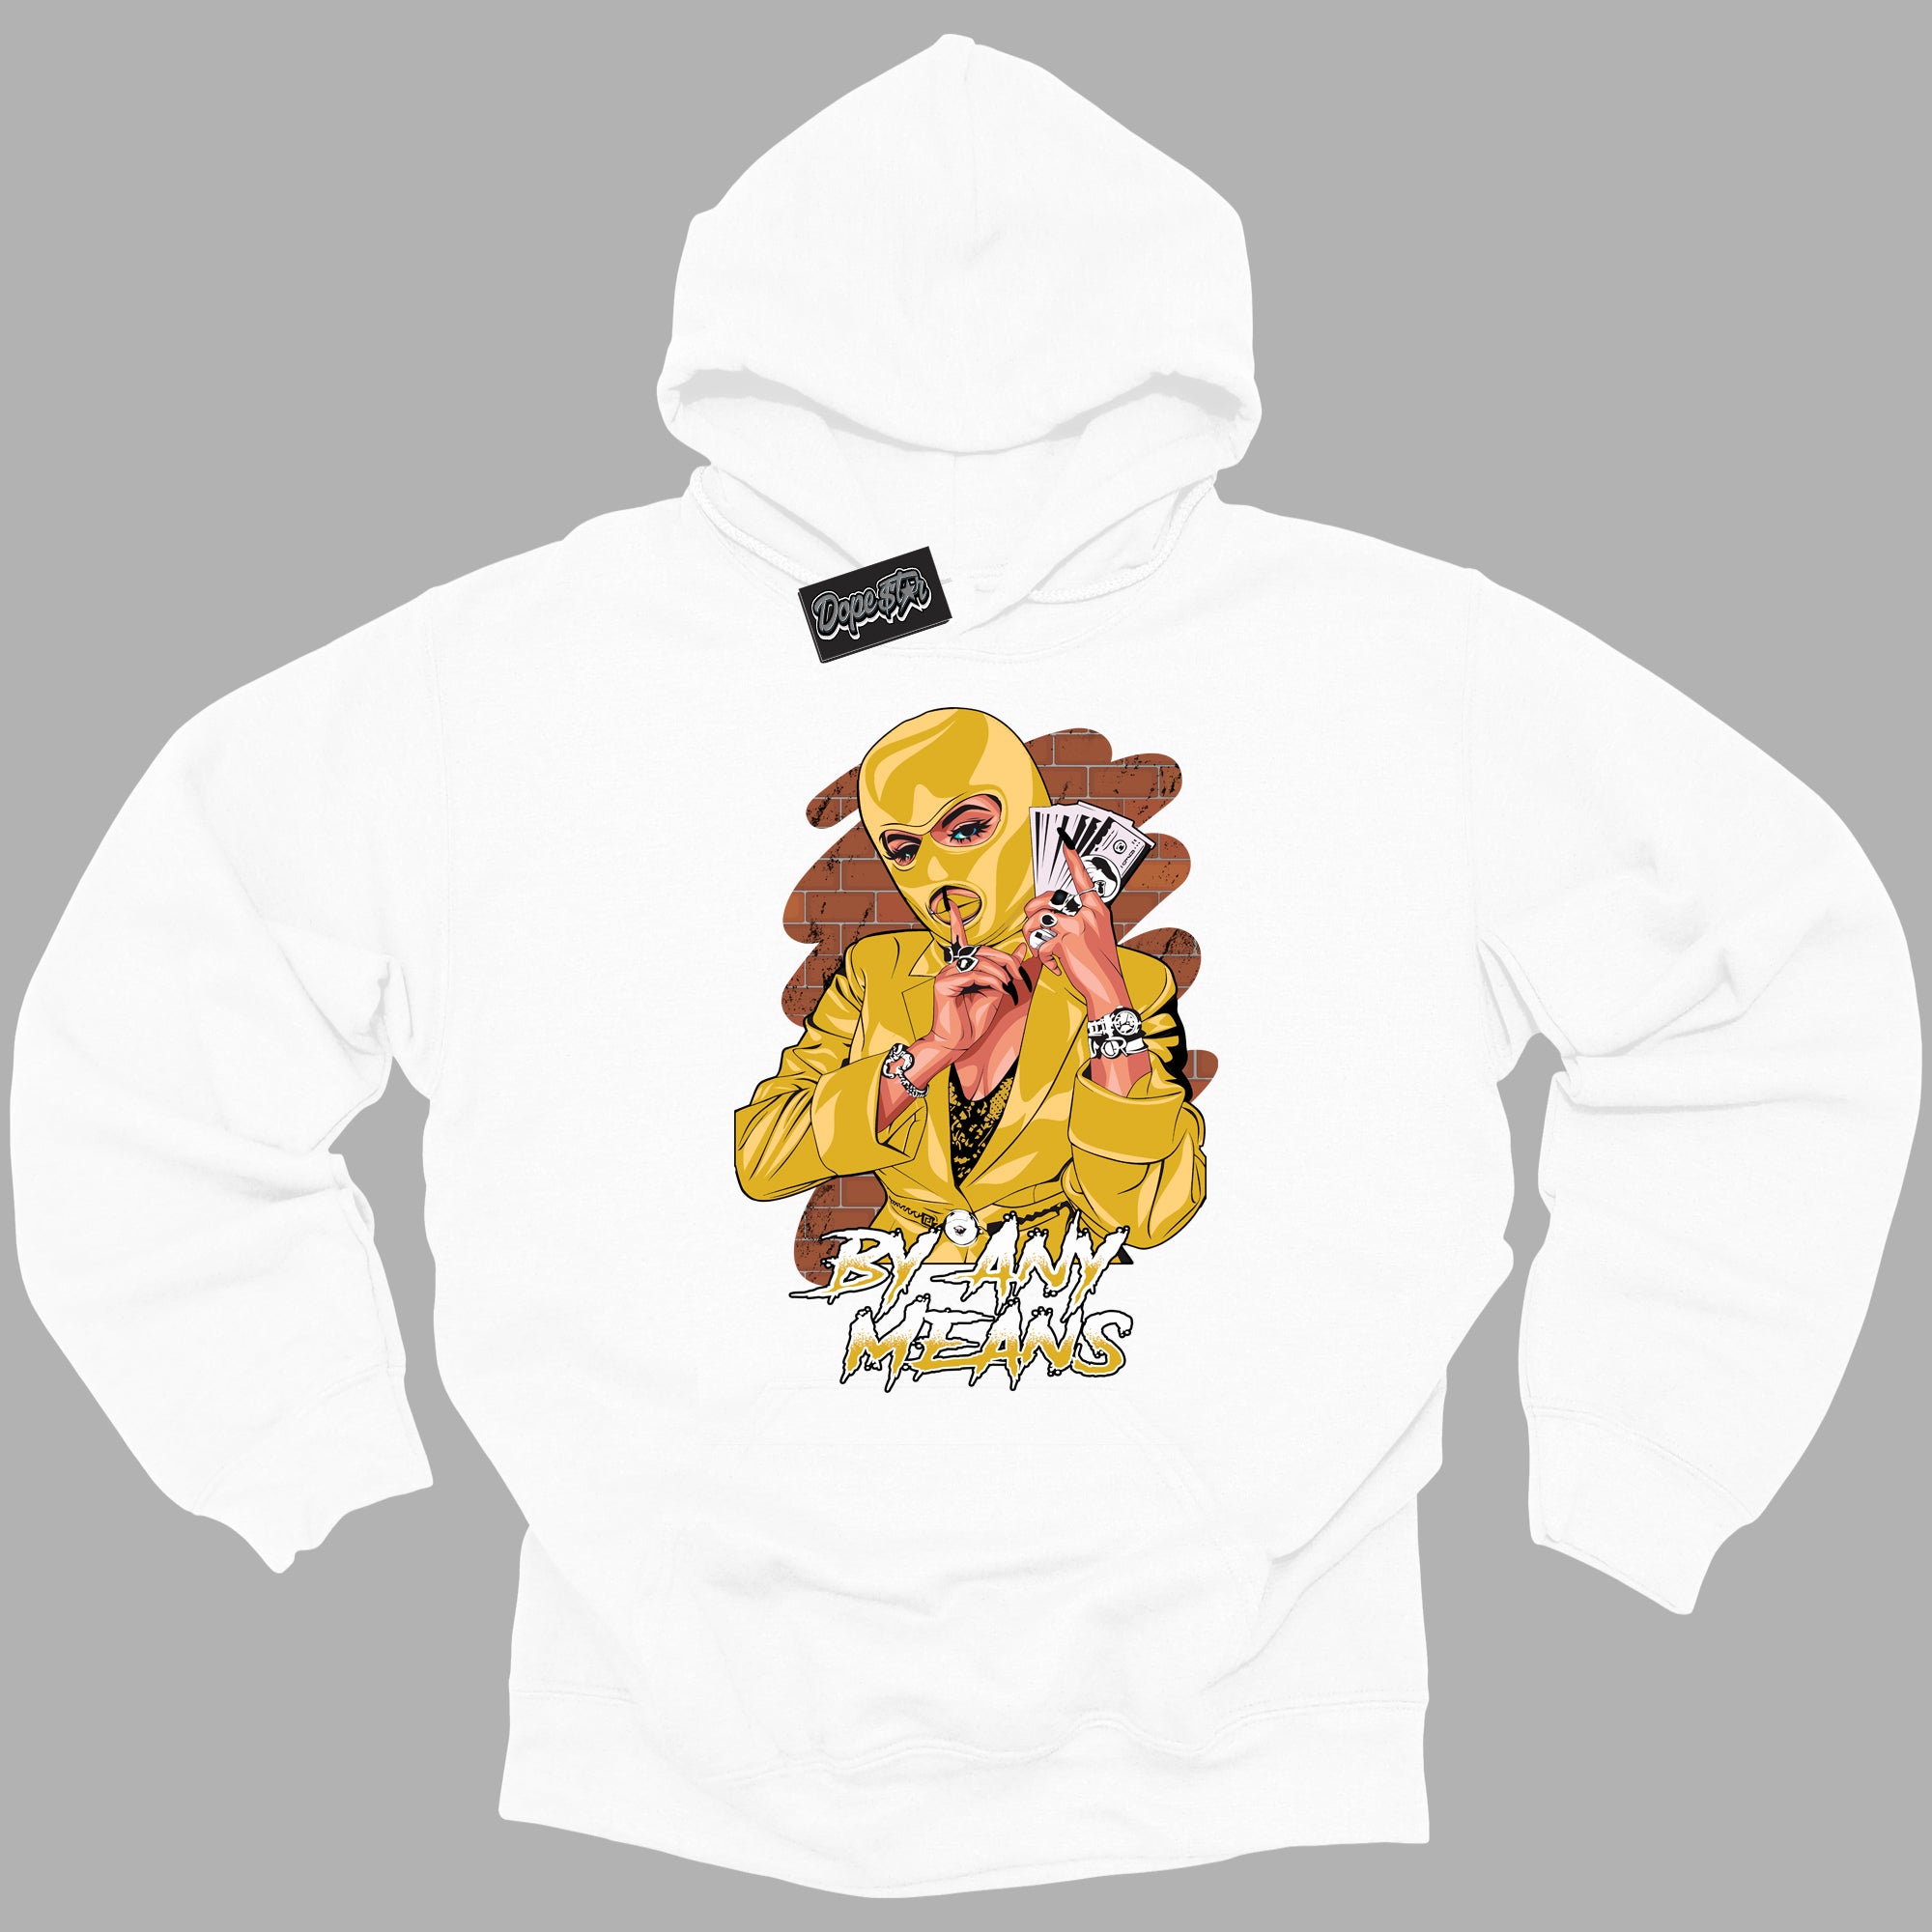 Cool White Hoodie with “By Any Means ”  design that Perfectly Matches Yellow Ochre 6s Sneakers.